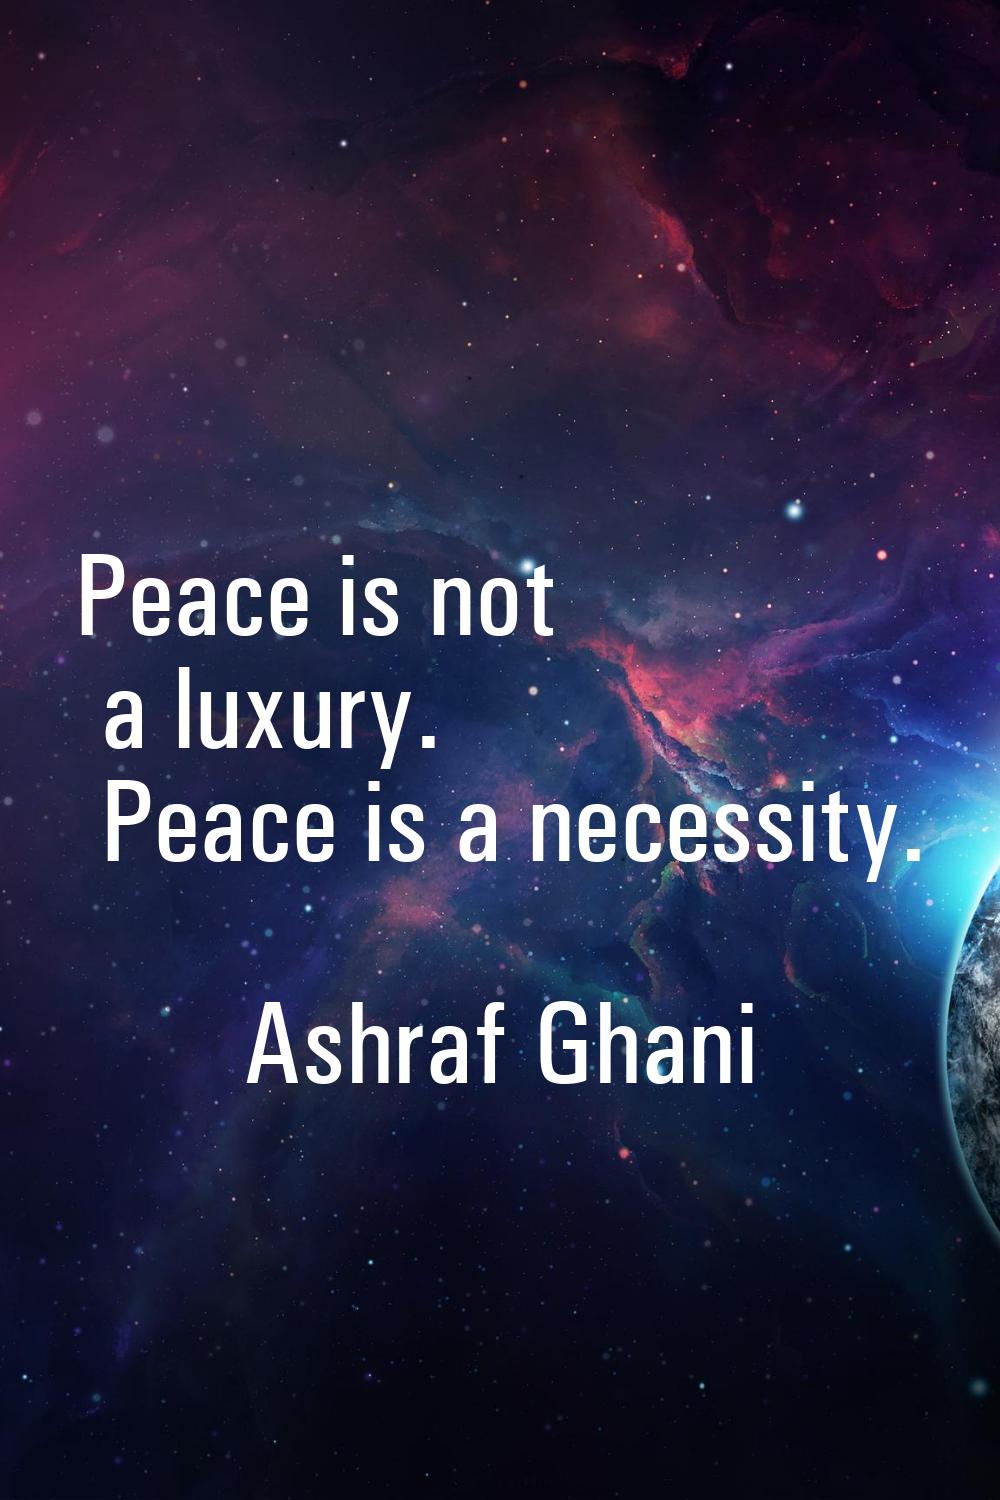 Peace is not a luxury. Peace is a necessity.